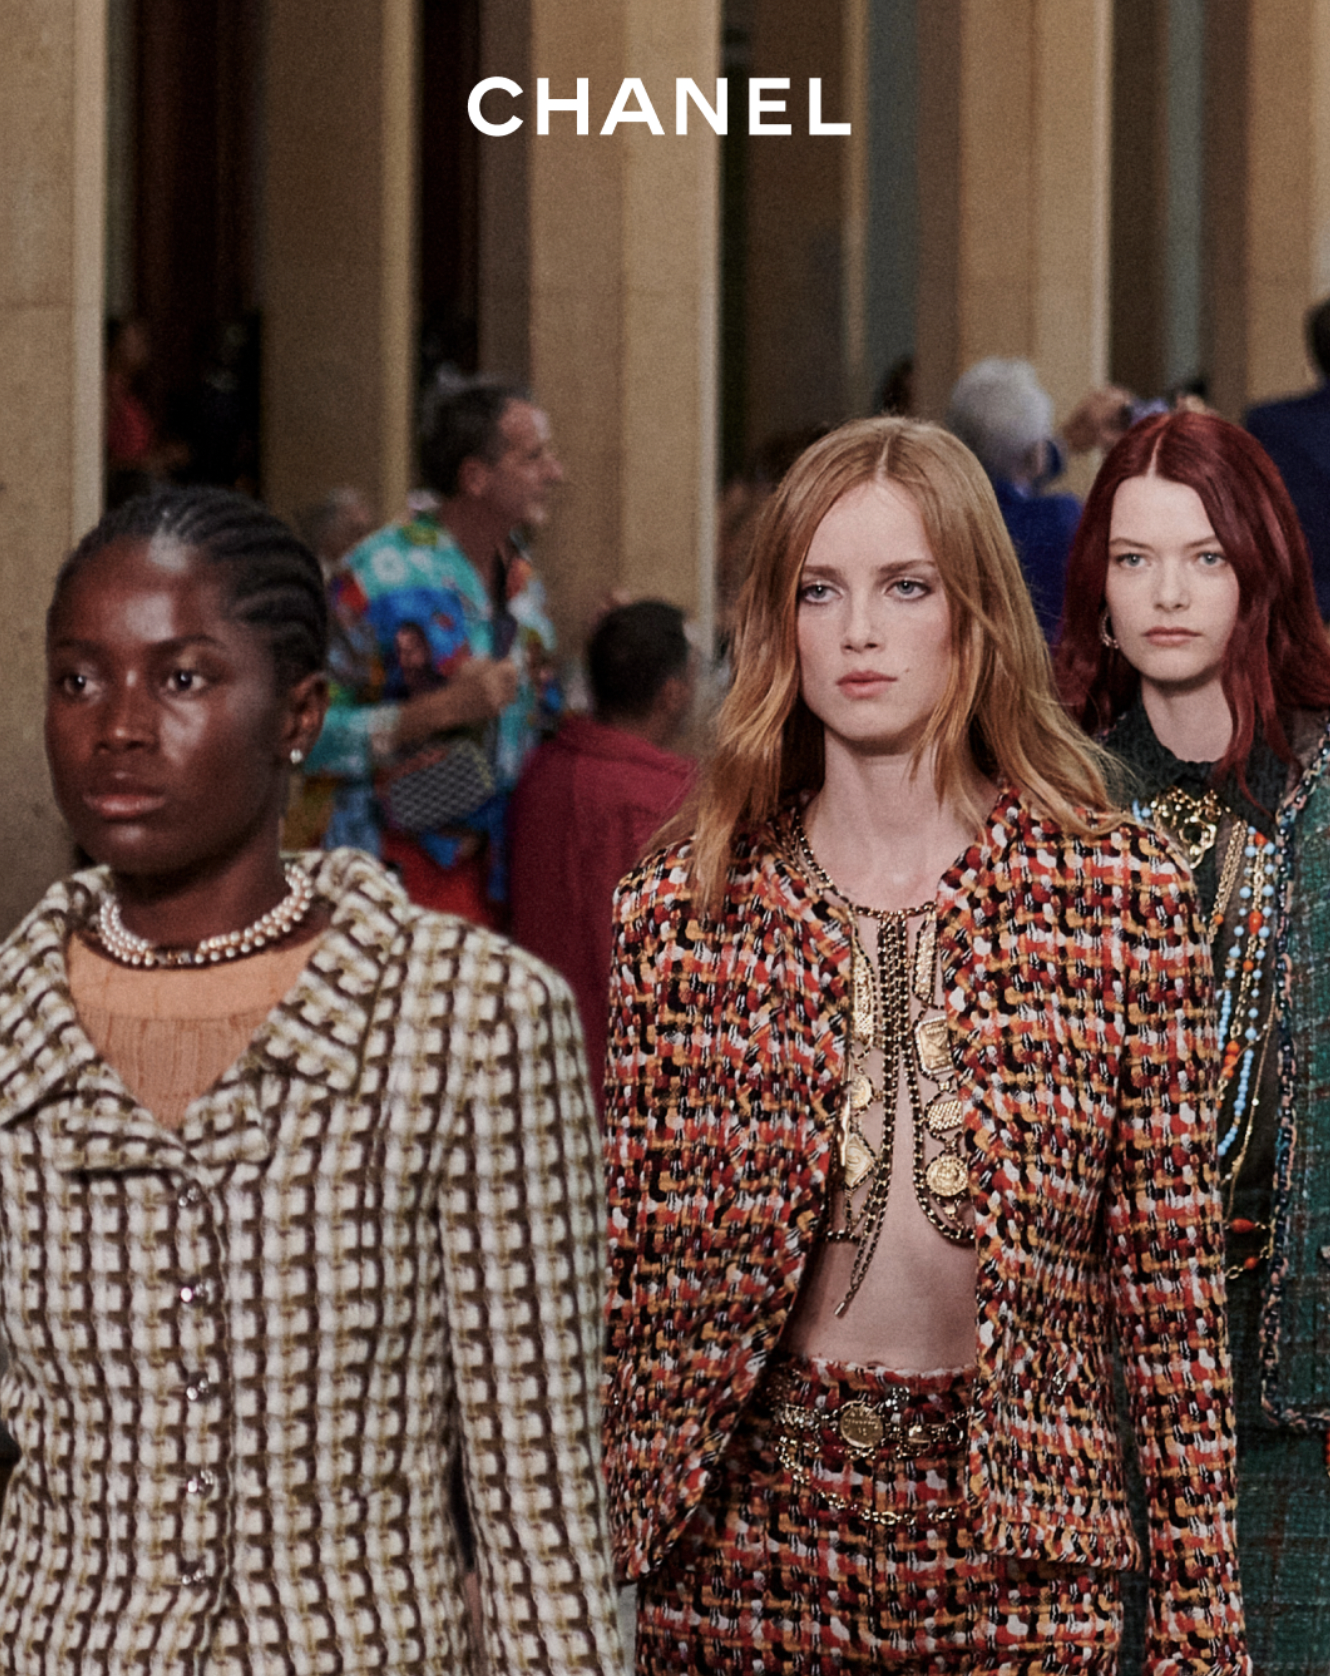 Chanel’s Five Key Directions for Advancing Corporate Strategy